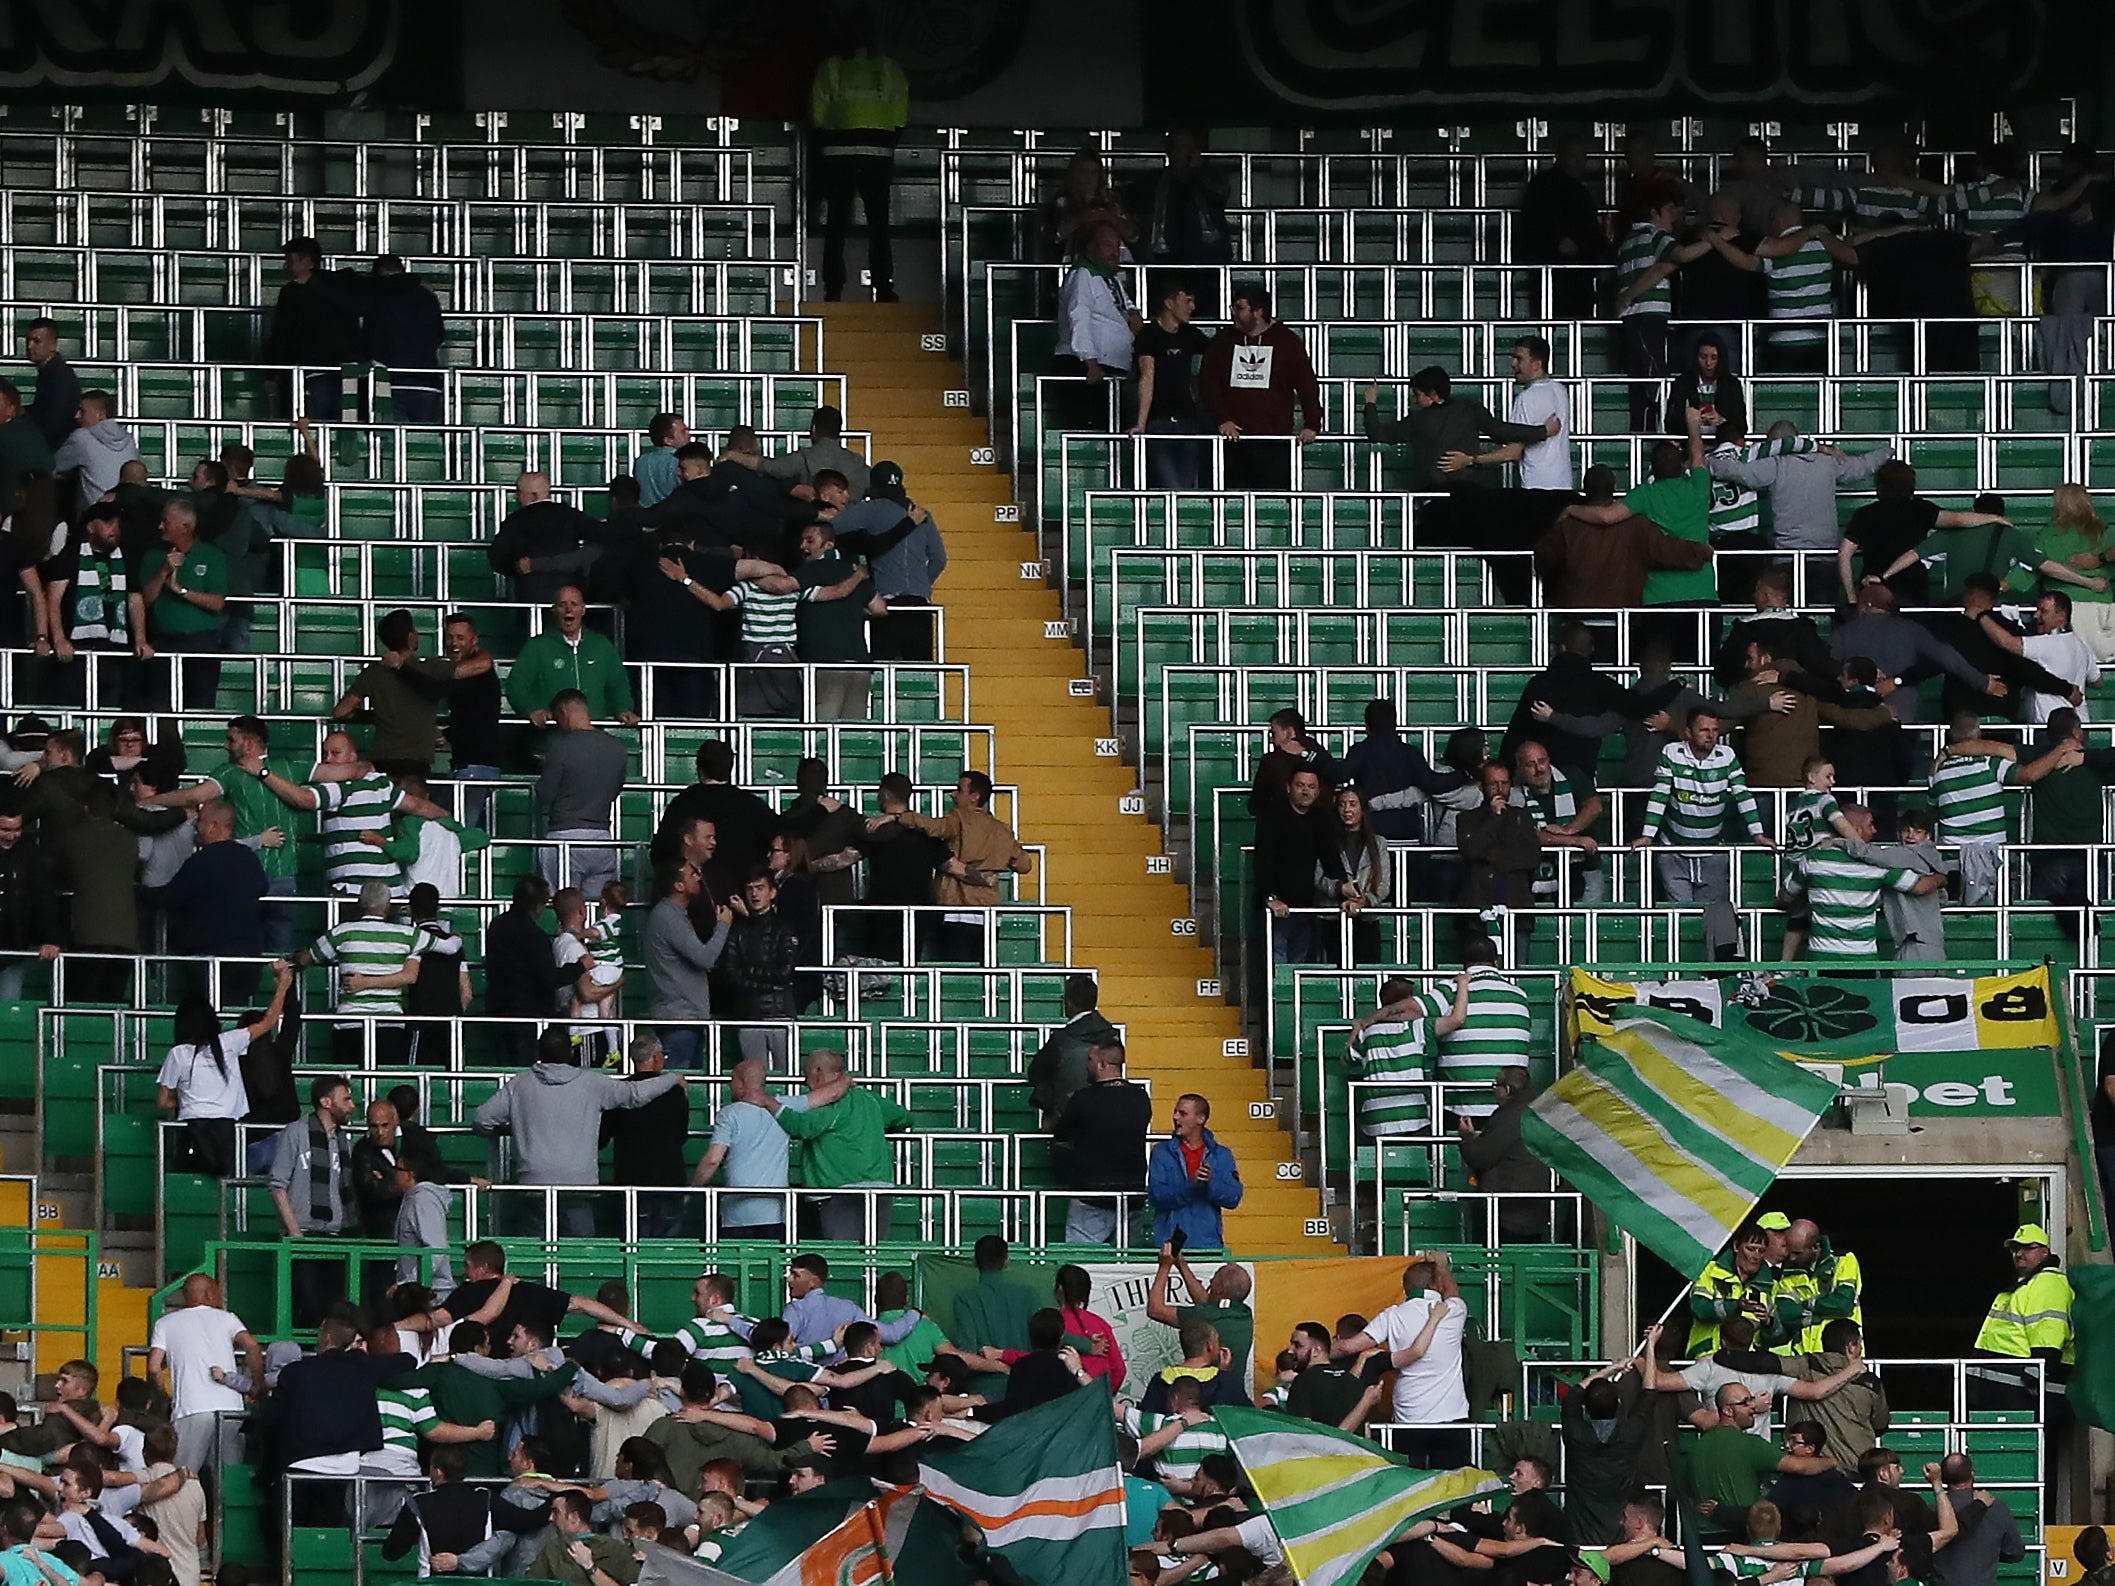 Celtic have successfully introduced safe standing